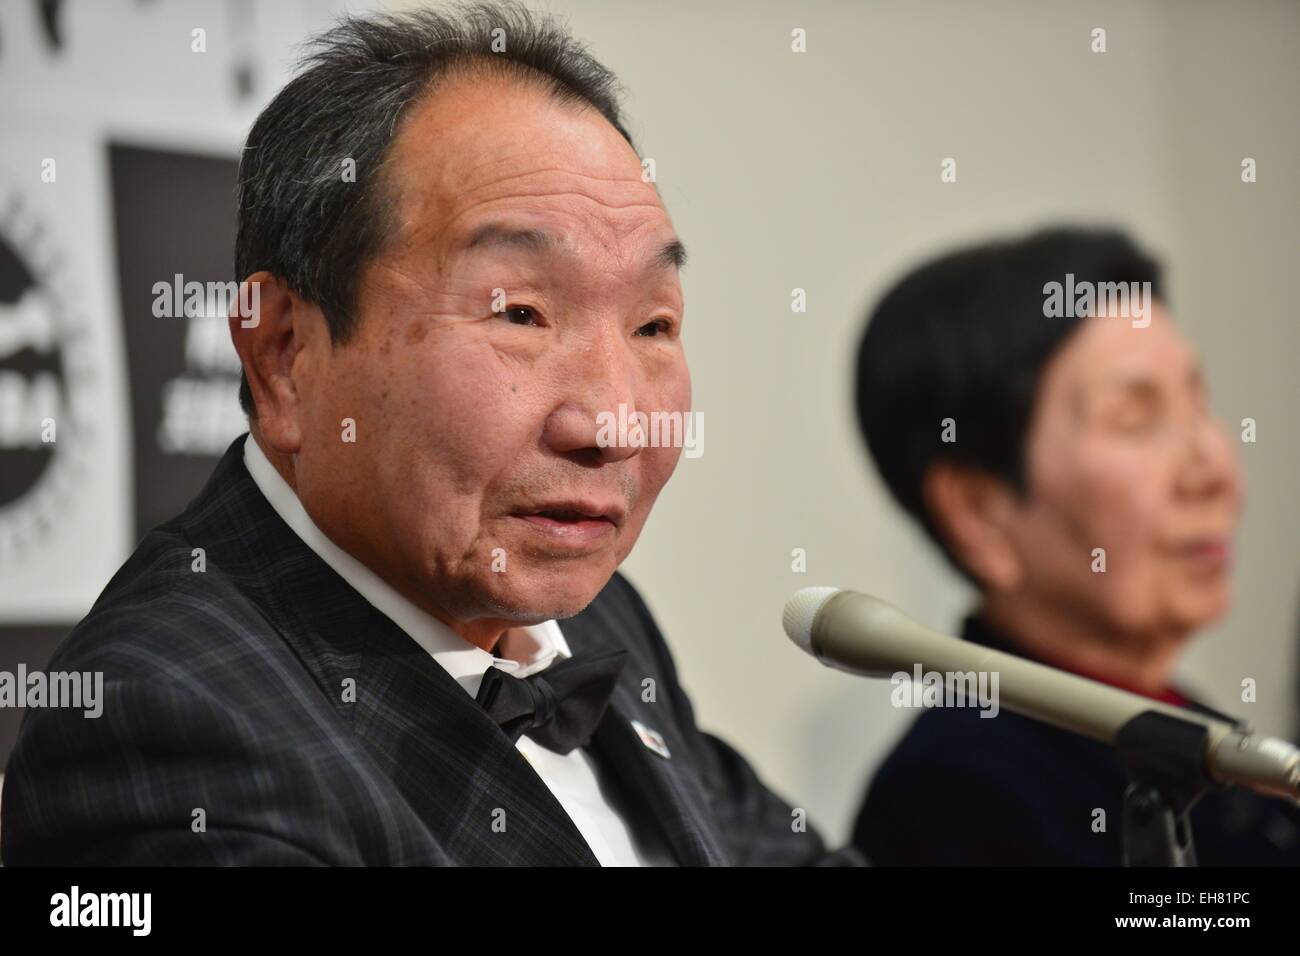 (L-R) Iwao Hakamada, Hideko Hakamada, MARCH 5, 2015 - Boxing : Iwao Hakamada speaks during a press conference after the boxing event at Korakuen Hall in Tokyo, Japan. Iwao Hakamada is a Japanese former professional boxer who was sentenced to death on September 11, 1968 and ended up spending 45 years on death row. In 2011 the Guinness World Records certified Hakamada as the world's longest-held death row inmate. In March 2014, he was granted a retrial and an immediate release when the Shizuoka district court found there was reason to believe evidence against him had been falsified. (Photo by Hi Stock Photo